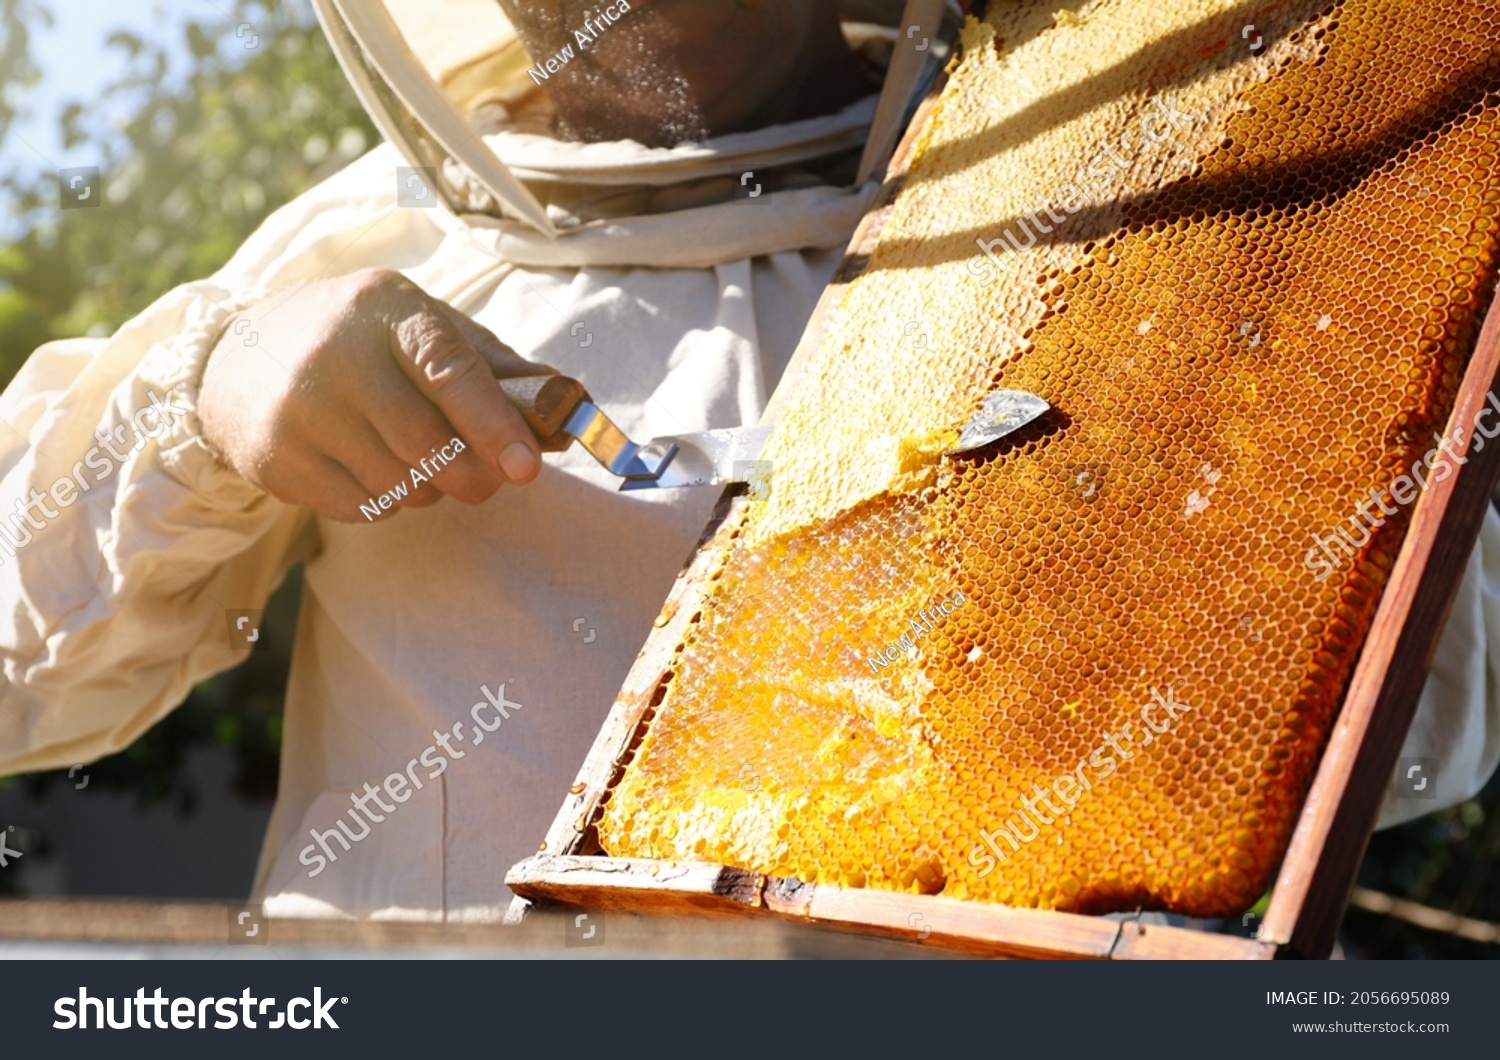 Senior beekeeper uncapping honeycomb frame with knife at table outdoors, closeup #2056695089